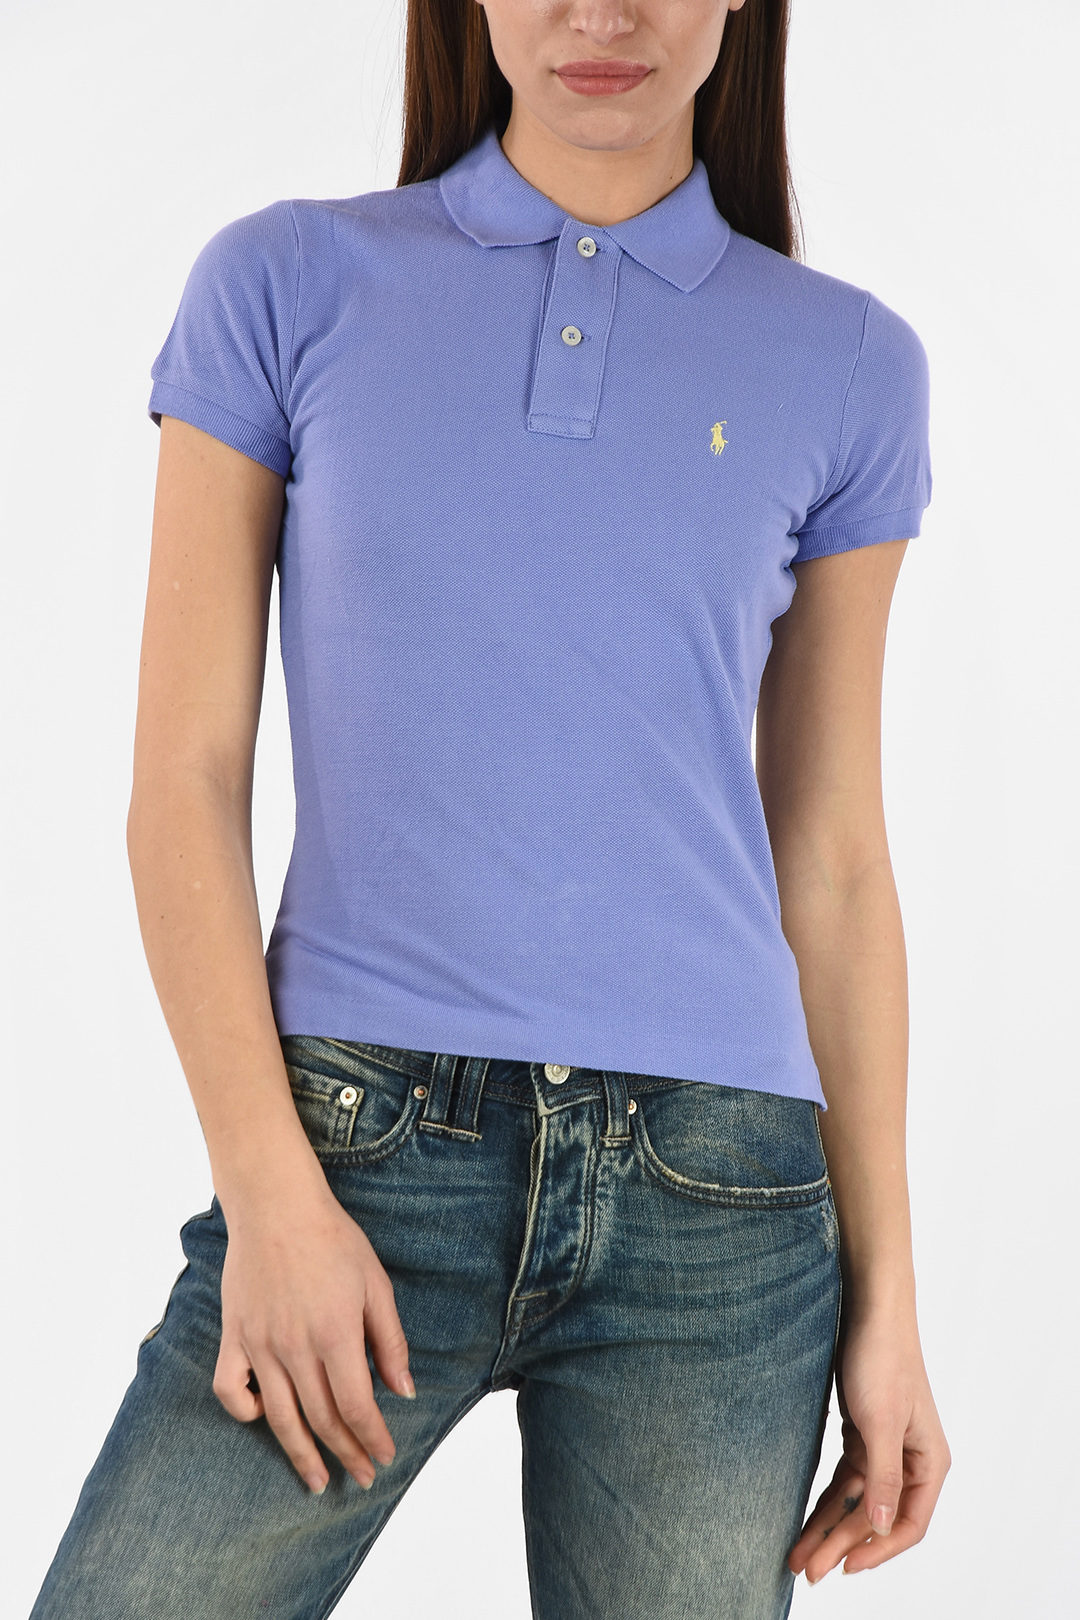 Polo Ralph Lauren Pique Skinny Fit 2 Button Polo women - Glamood Outlet